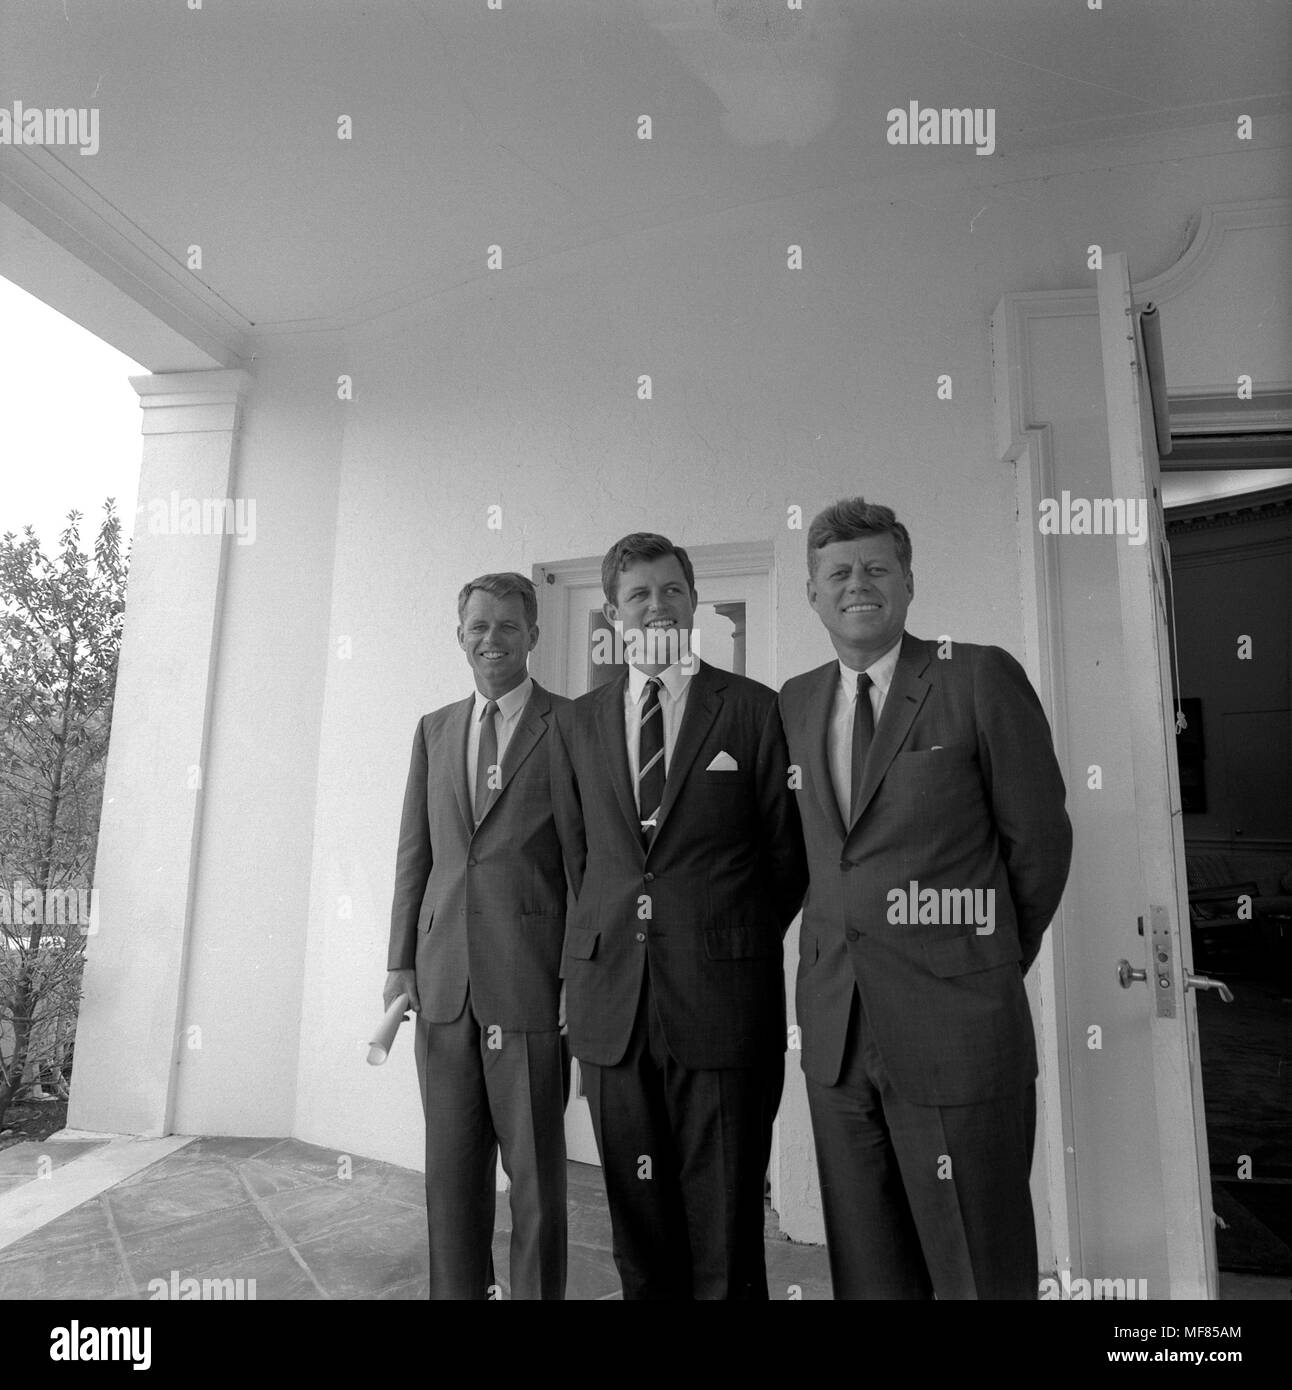 SEN JOHN F KENNEDY WITH BROTHERS ROBERT AND EDWARD IN 1960  8X10 PHOTO AA-414 